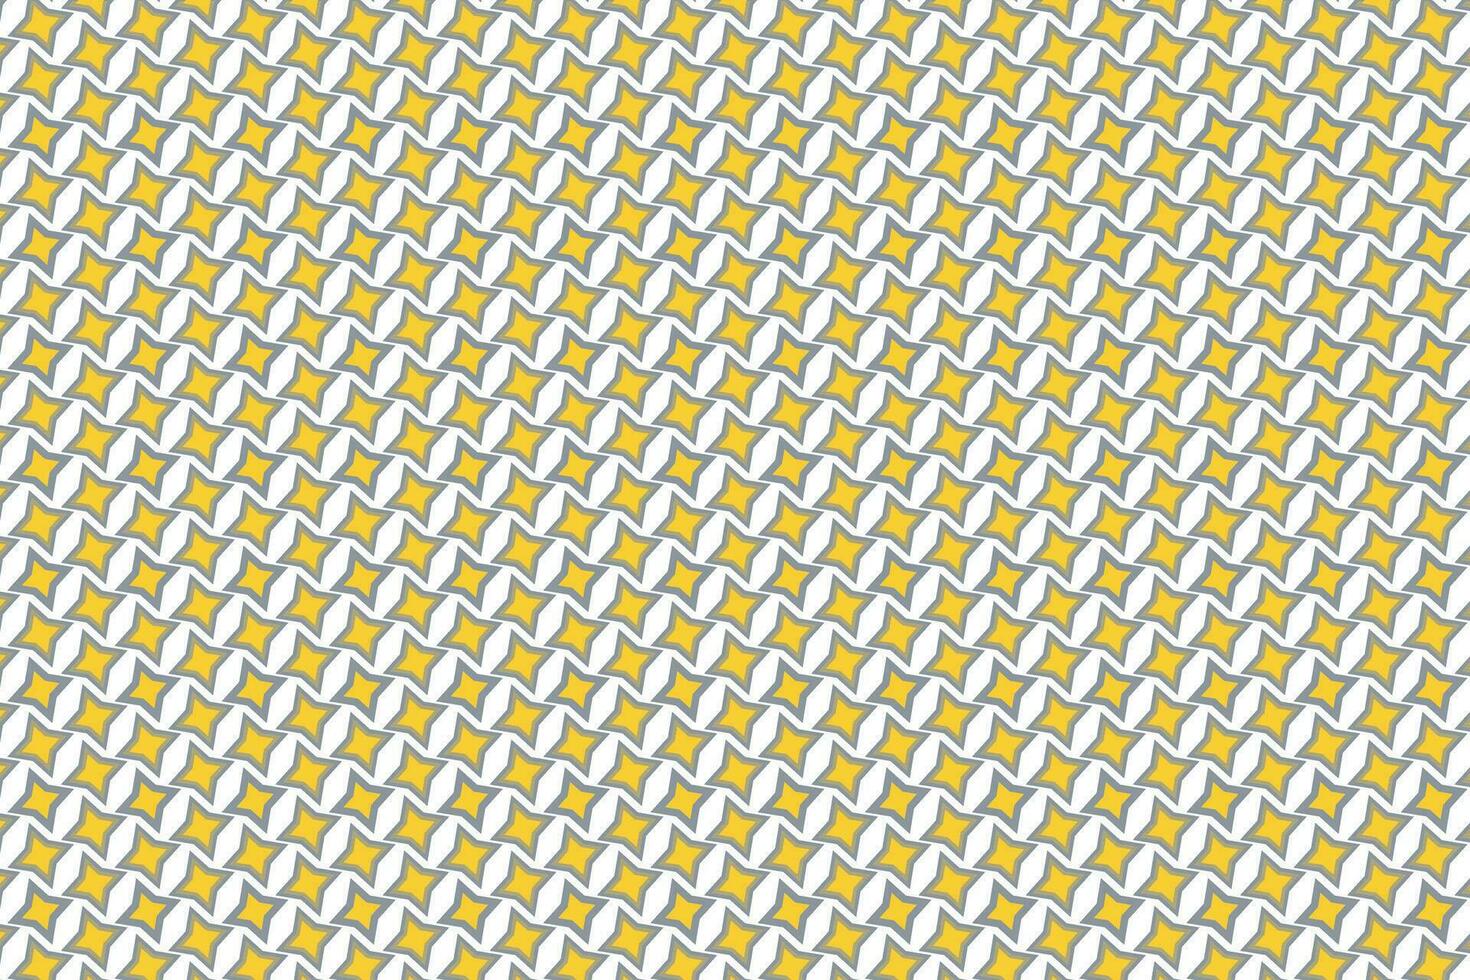 modern simple abstract seamlees gold silver metal colour star pattern on white colour background vector